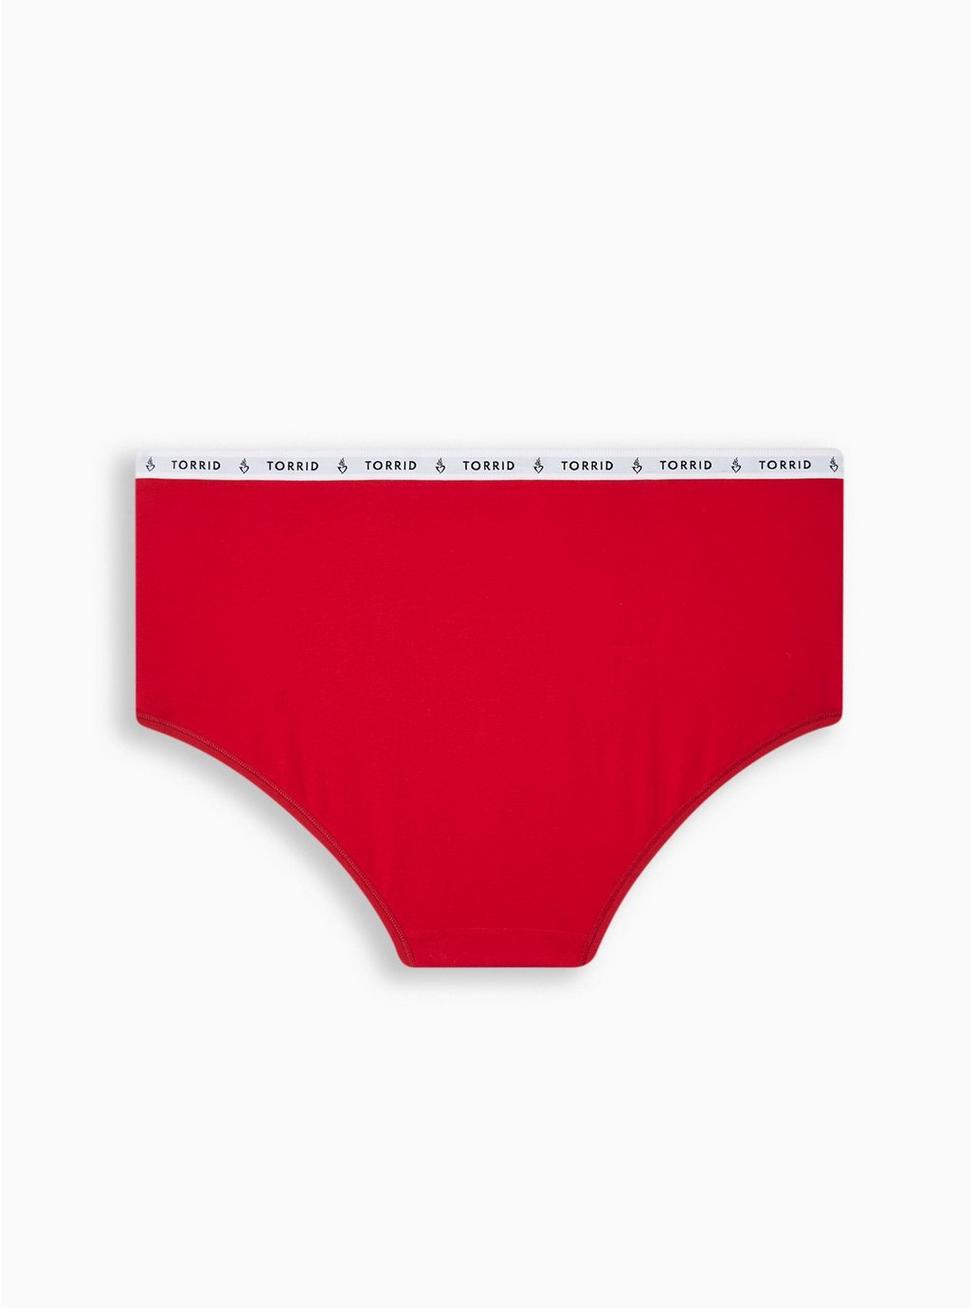 Cotton Mid-Rise Brief Logo Panty, JESTER RED, alternate